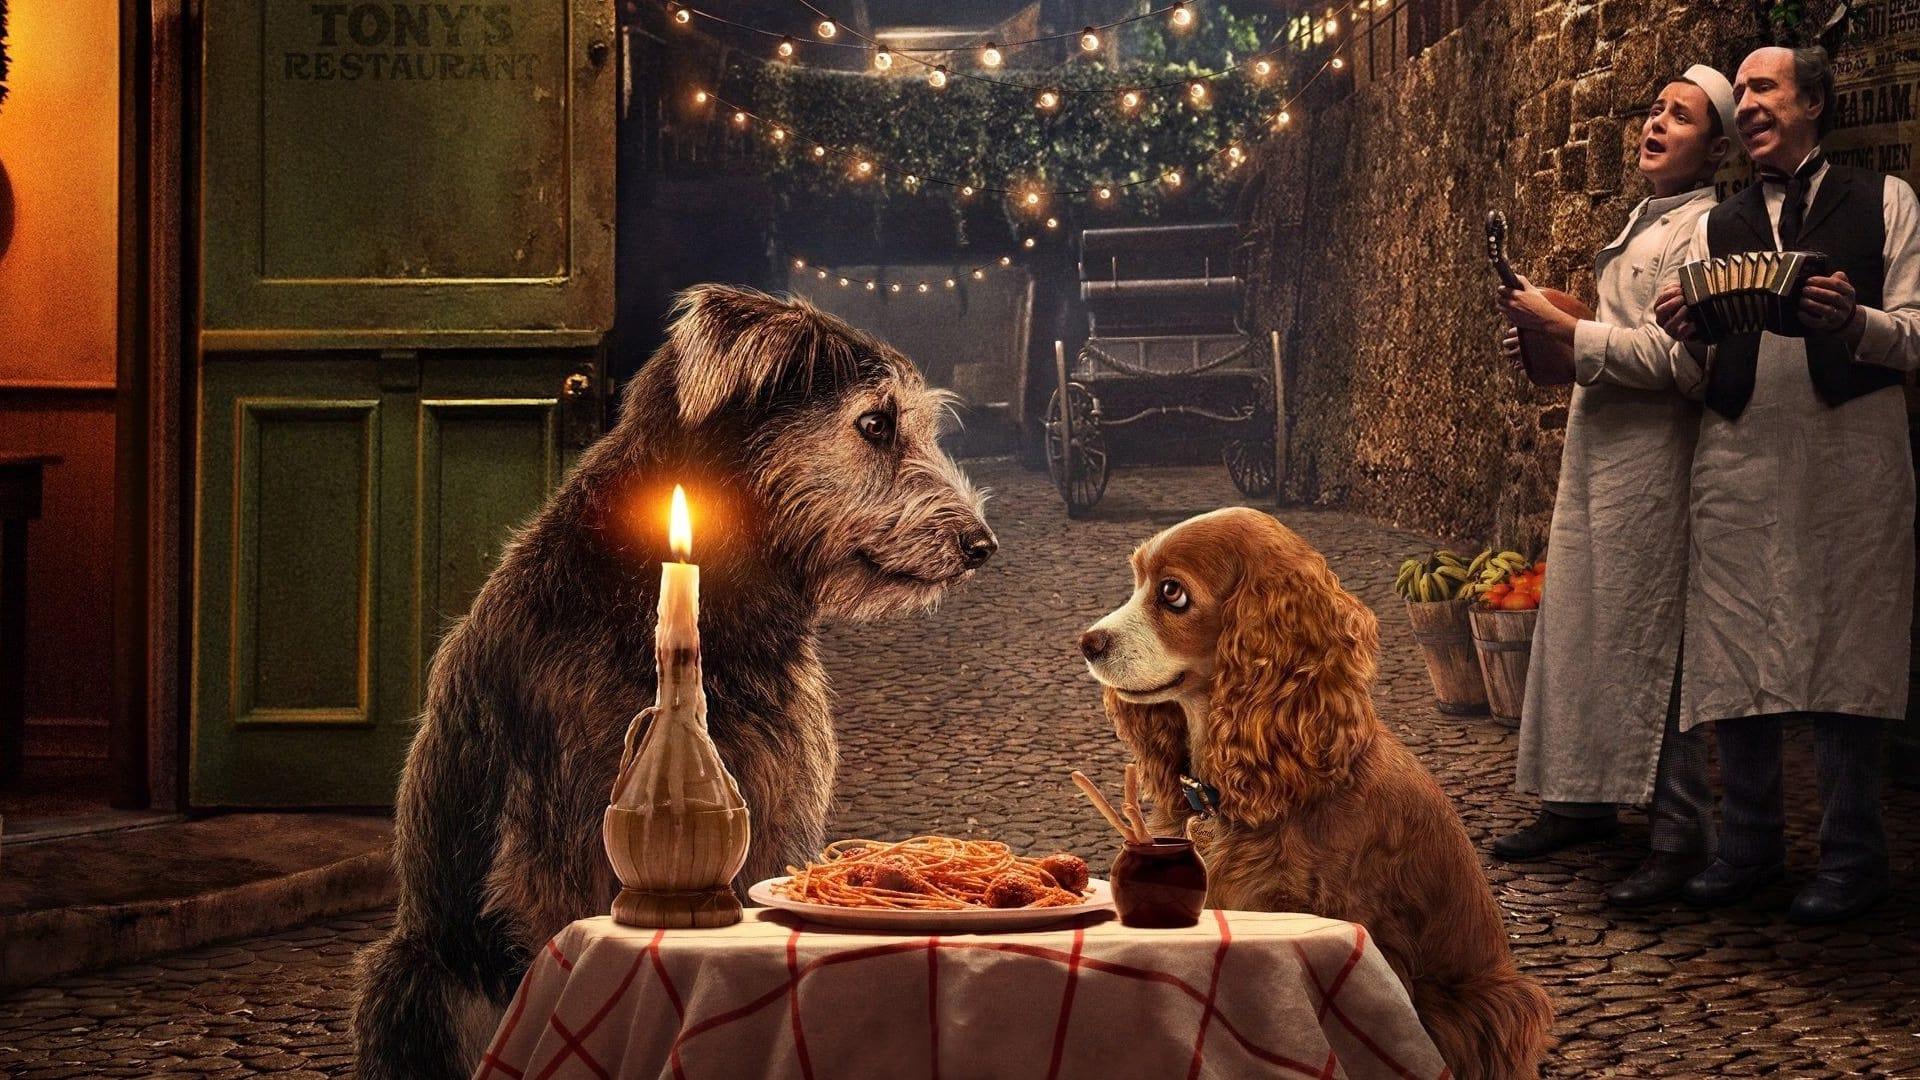 Lady and the Tramp backdrop